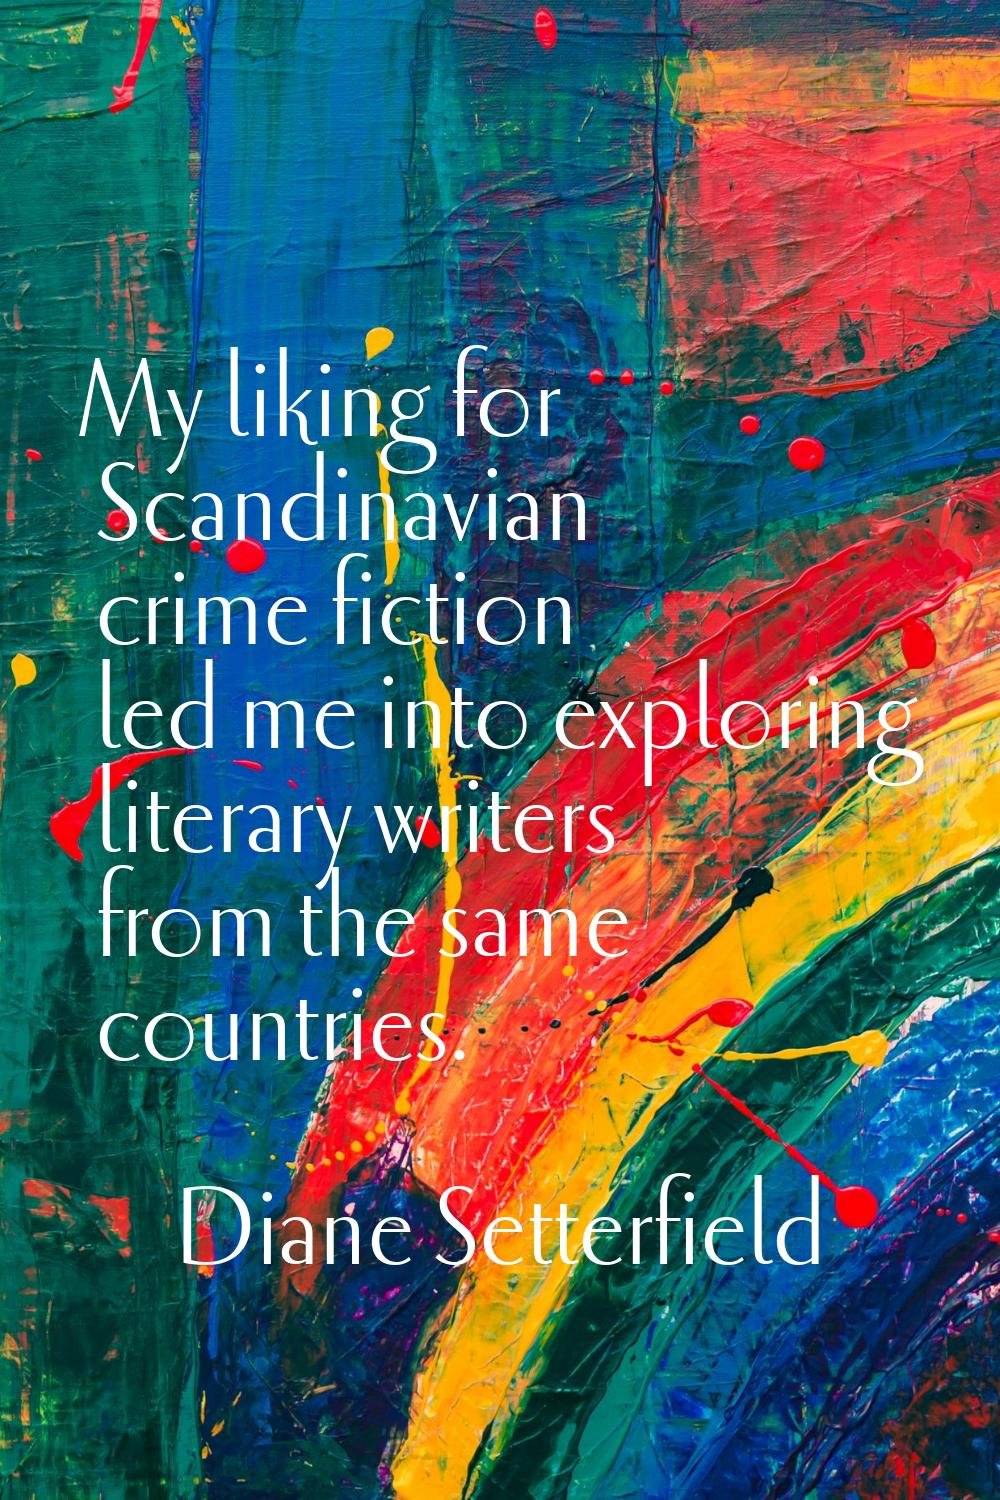 My liking for Scandinavian crime fiction led me into exploring literary writers from the same count